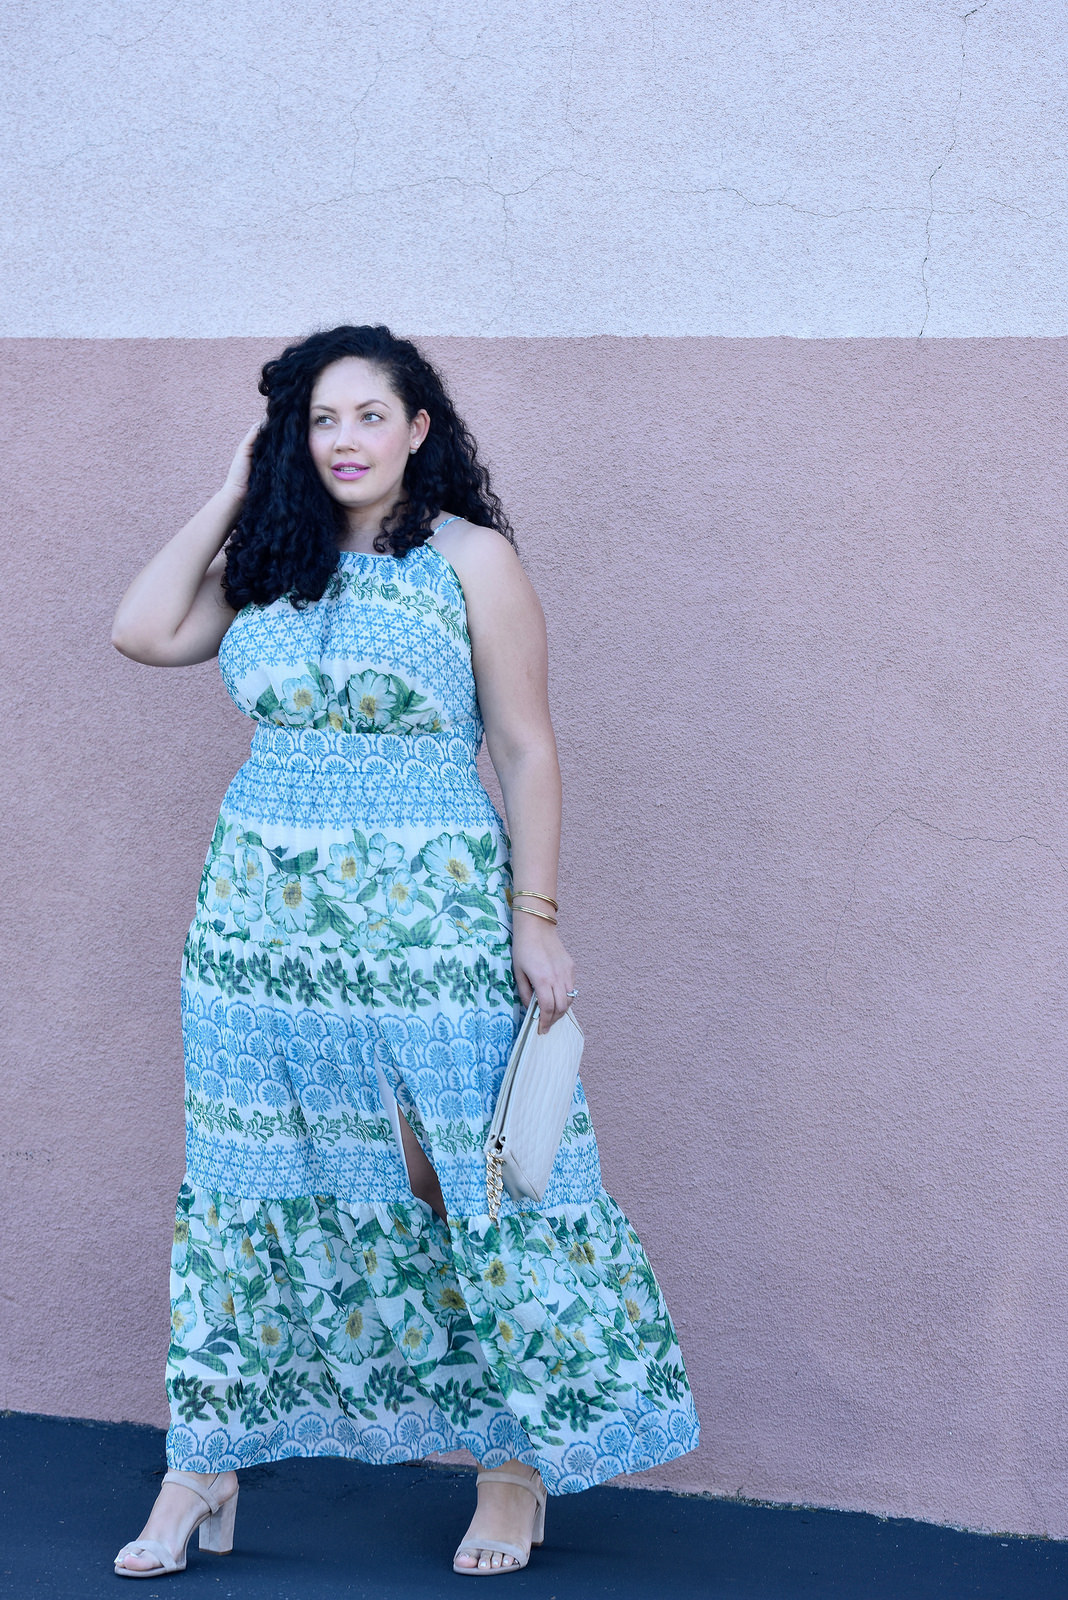 Plus size Maxi Dress by Eliza J, Bag from BCBG, Shoes by Nordstorm, and Love Lorn Lipstick by Mac via @girlwithcurves